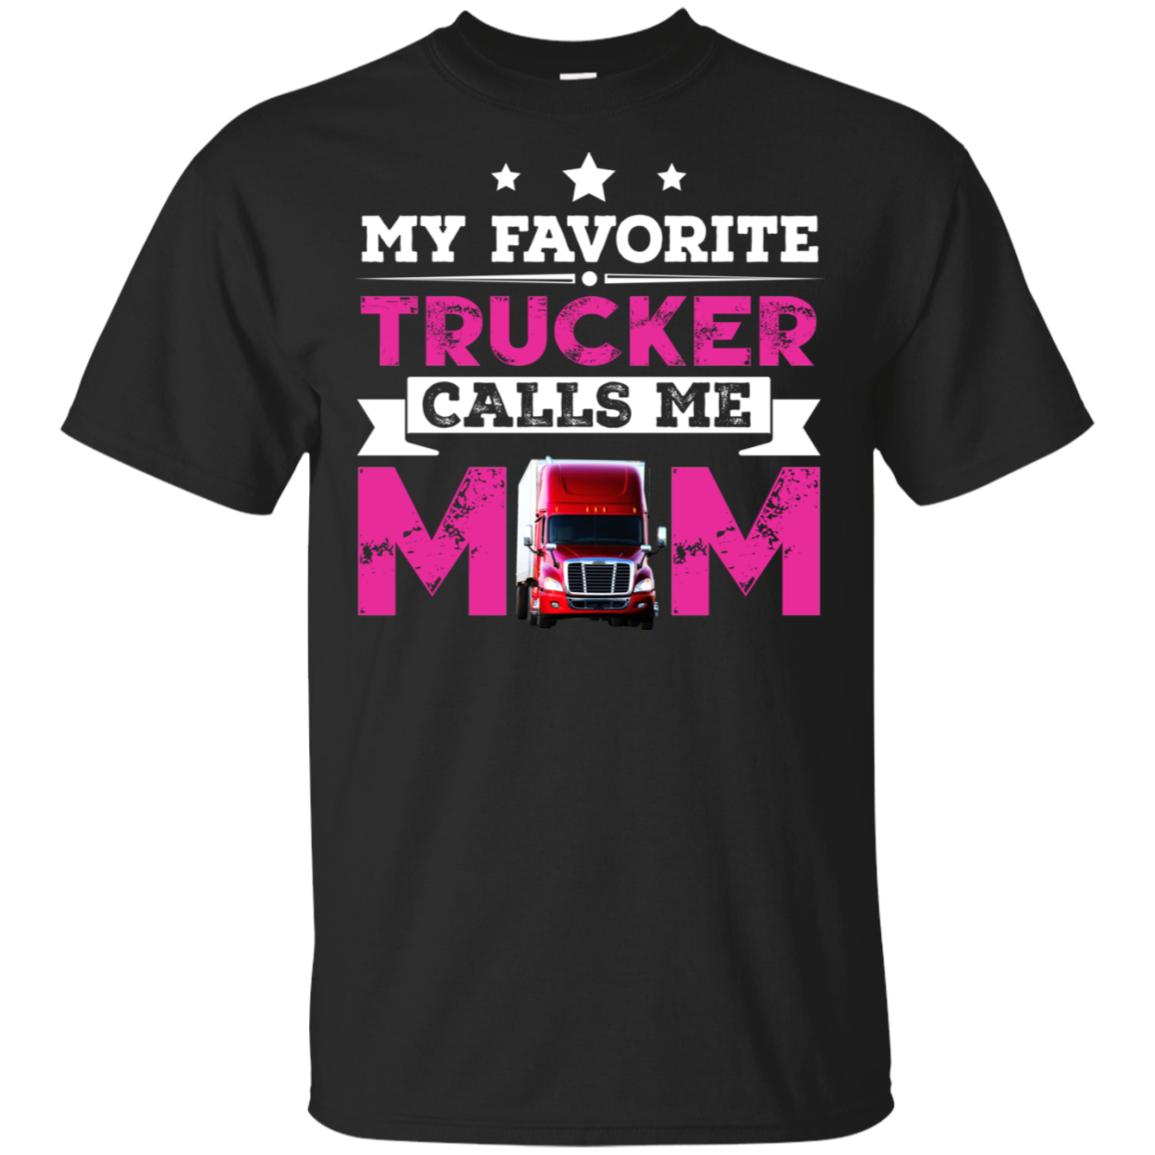 My Favorite Trucker Calls Me Mom Awesome Gift Shirt For Mother s Day HA04